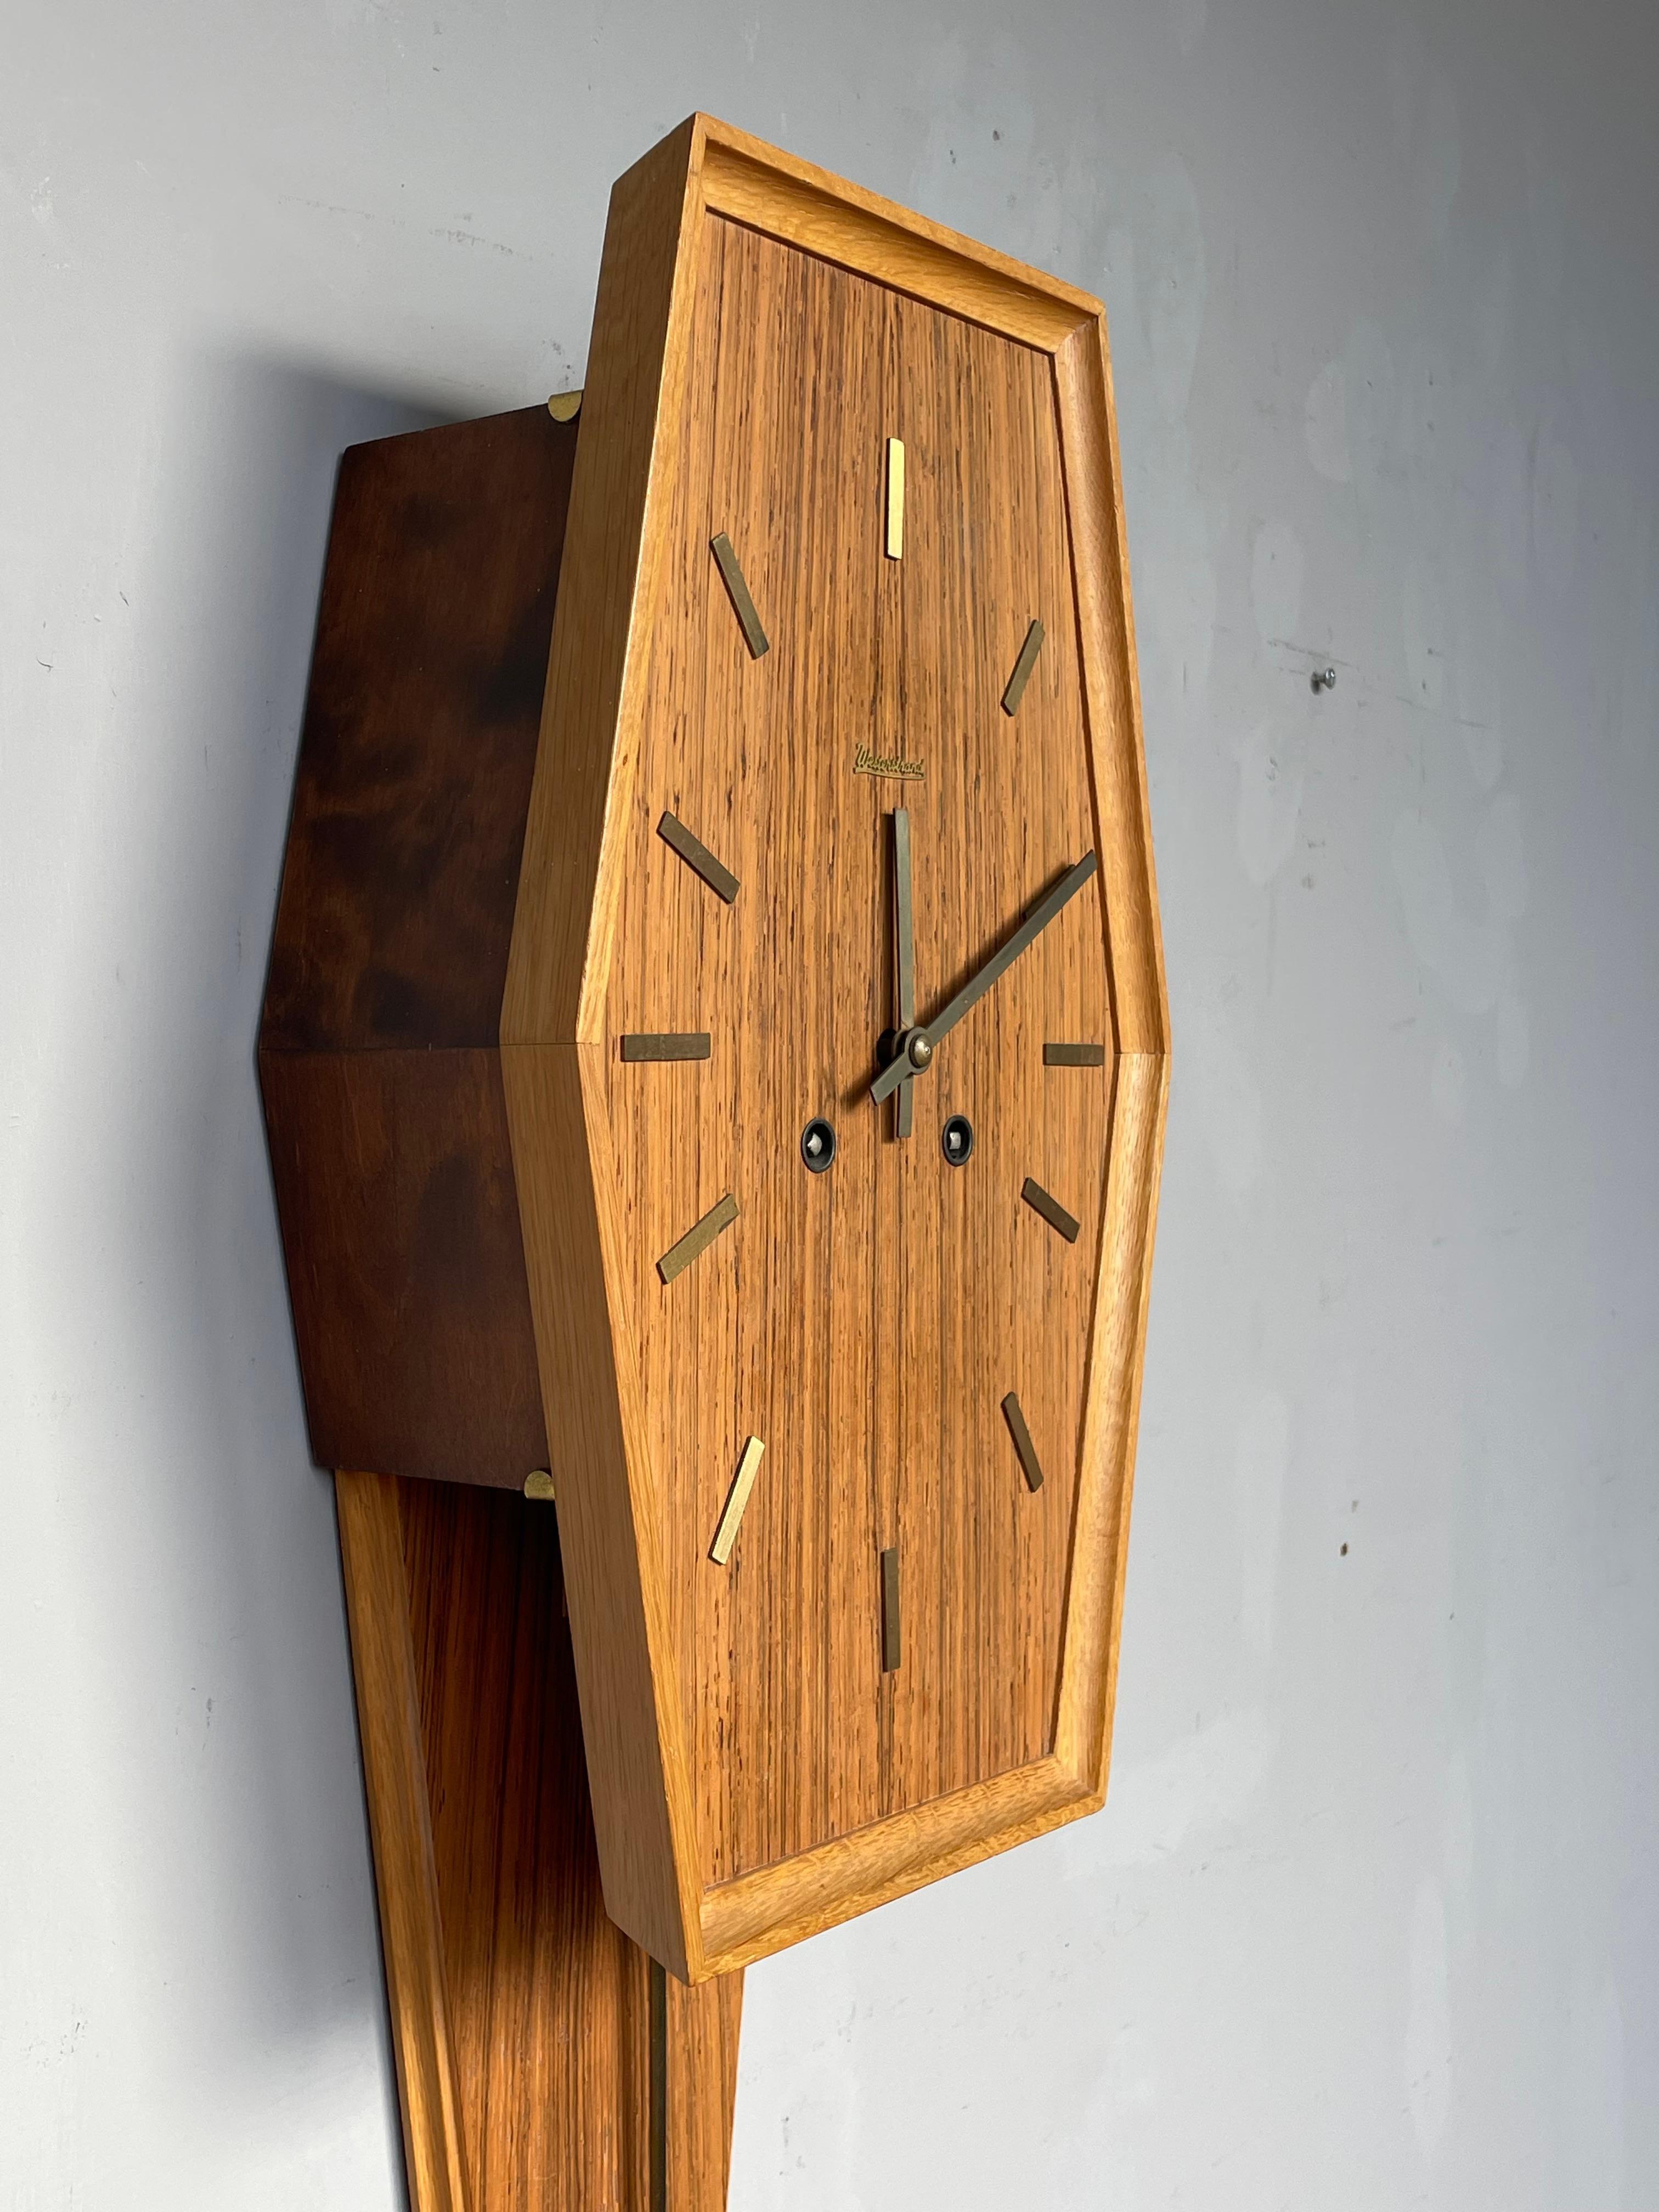 Beautiful Midcentury Modern Wooden Pendulum Wall Clock By Westerstrand, Sweden For Sale 5